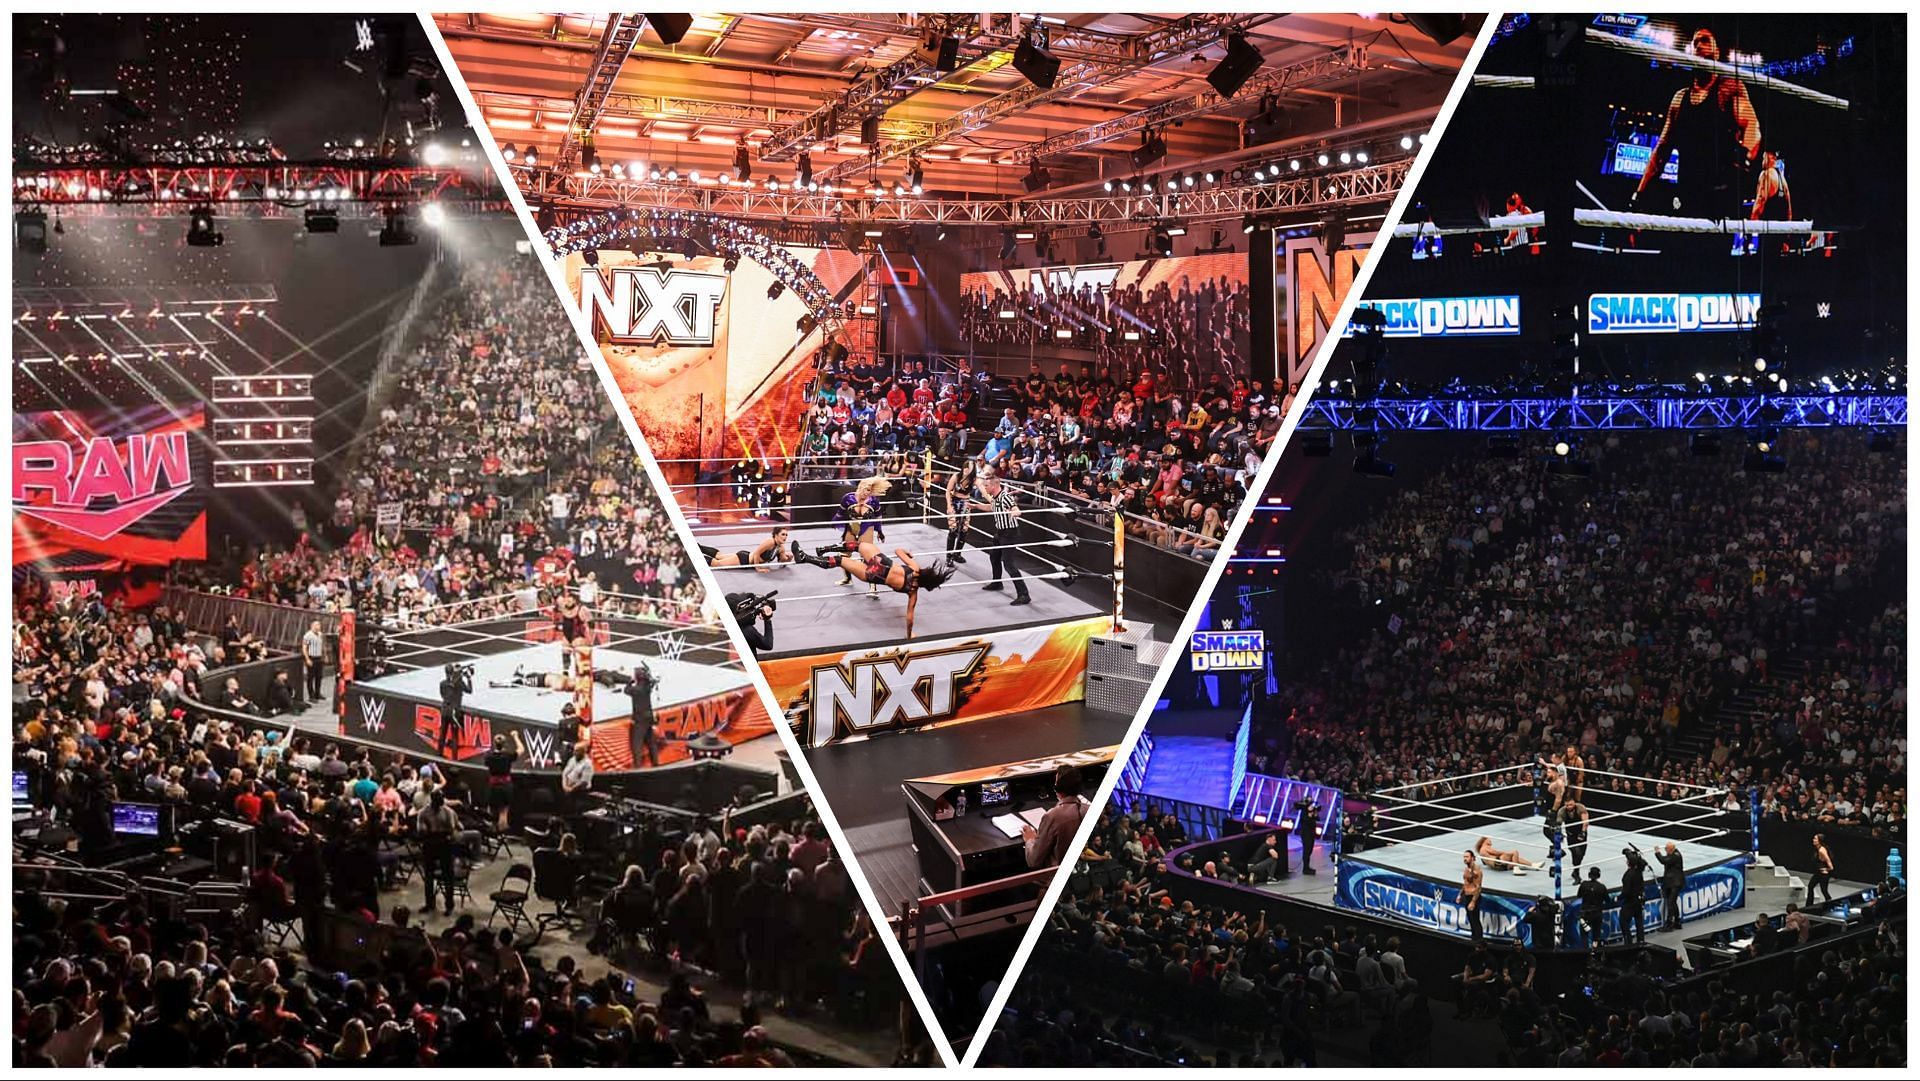 A look at the WWE RAW, NXT, and SmackDown setups for events